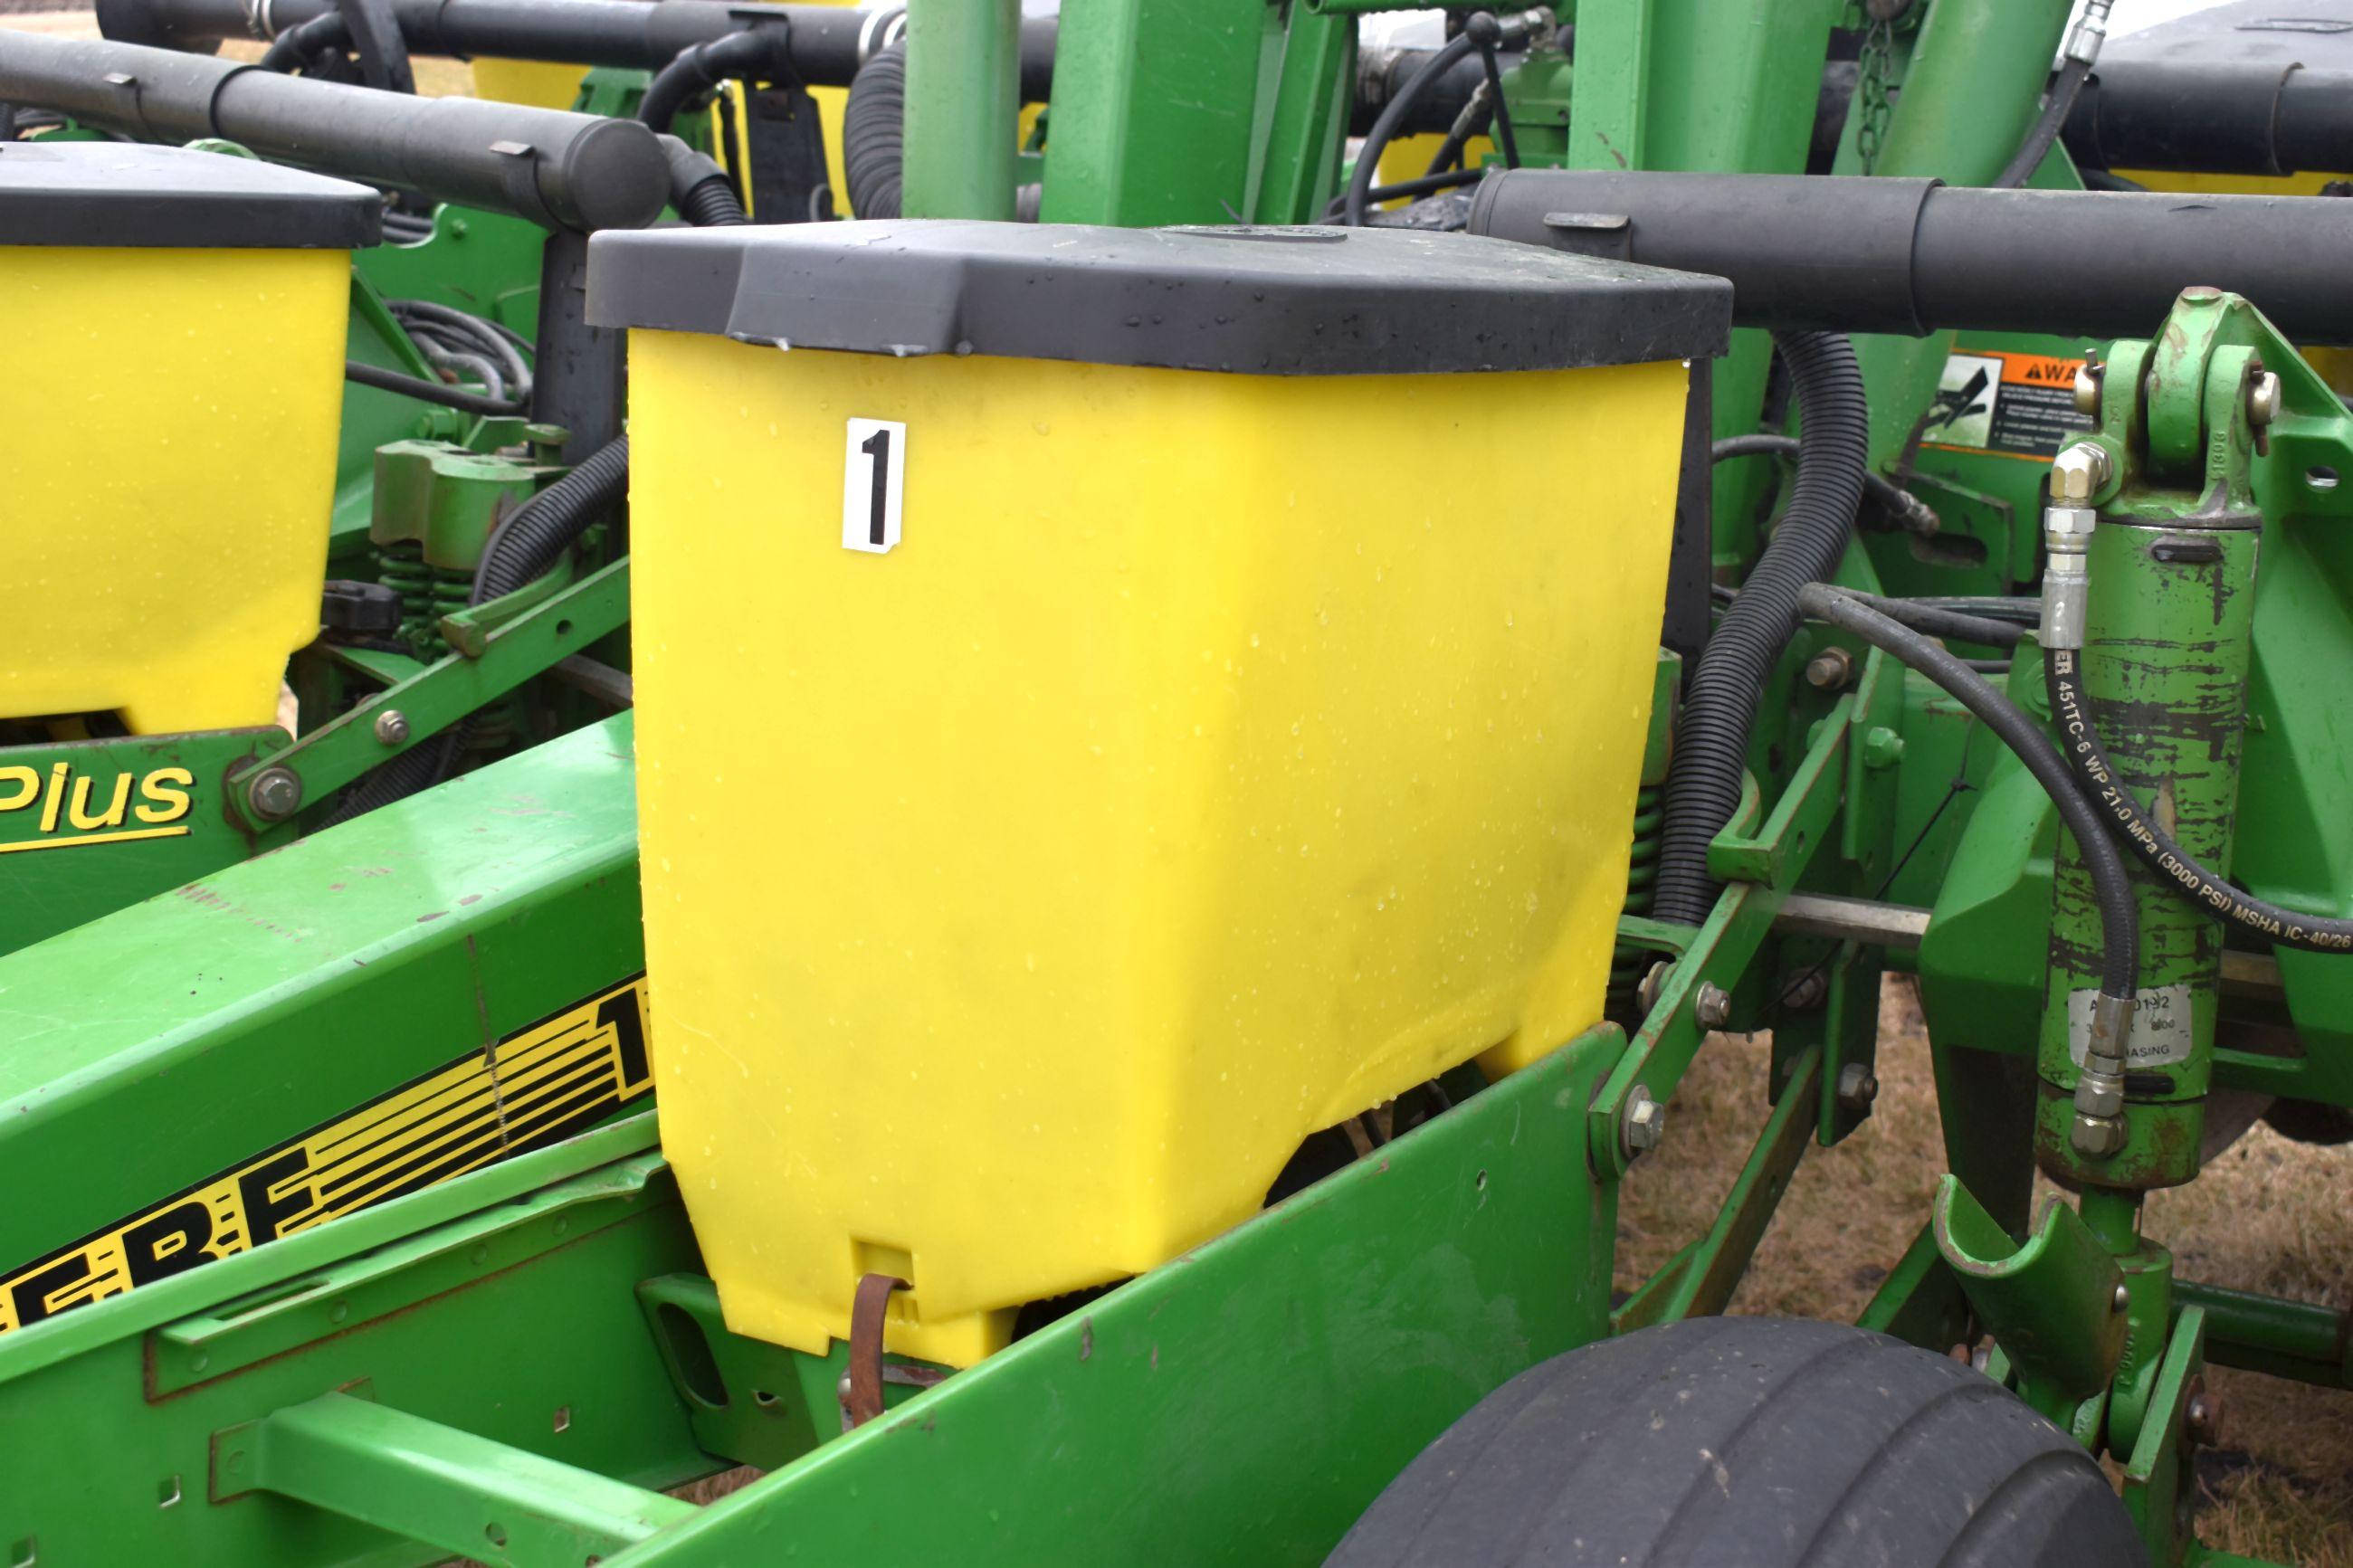 1996 John Deere 1760 Conservation Planter 12Row 30” MaxEmerge Plus, VacuMeter, JD Row Cleaners, JD 2